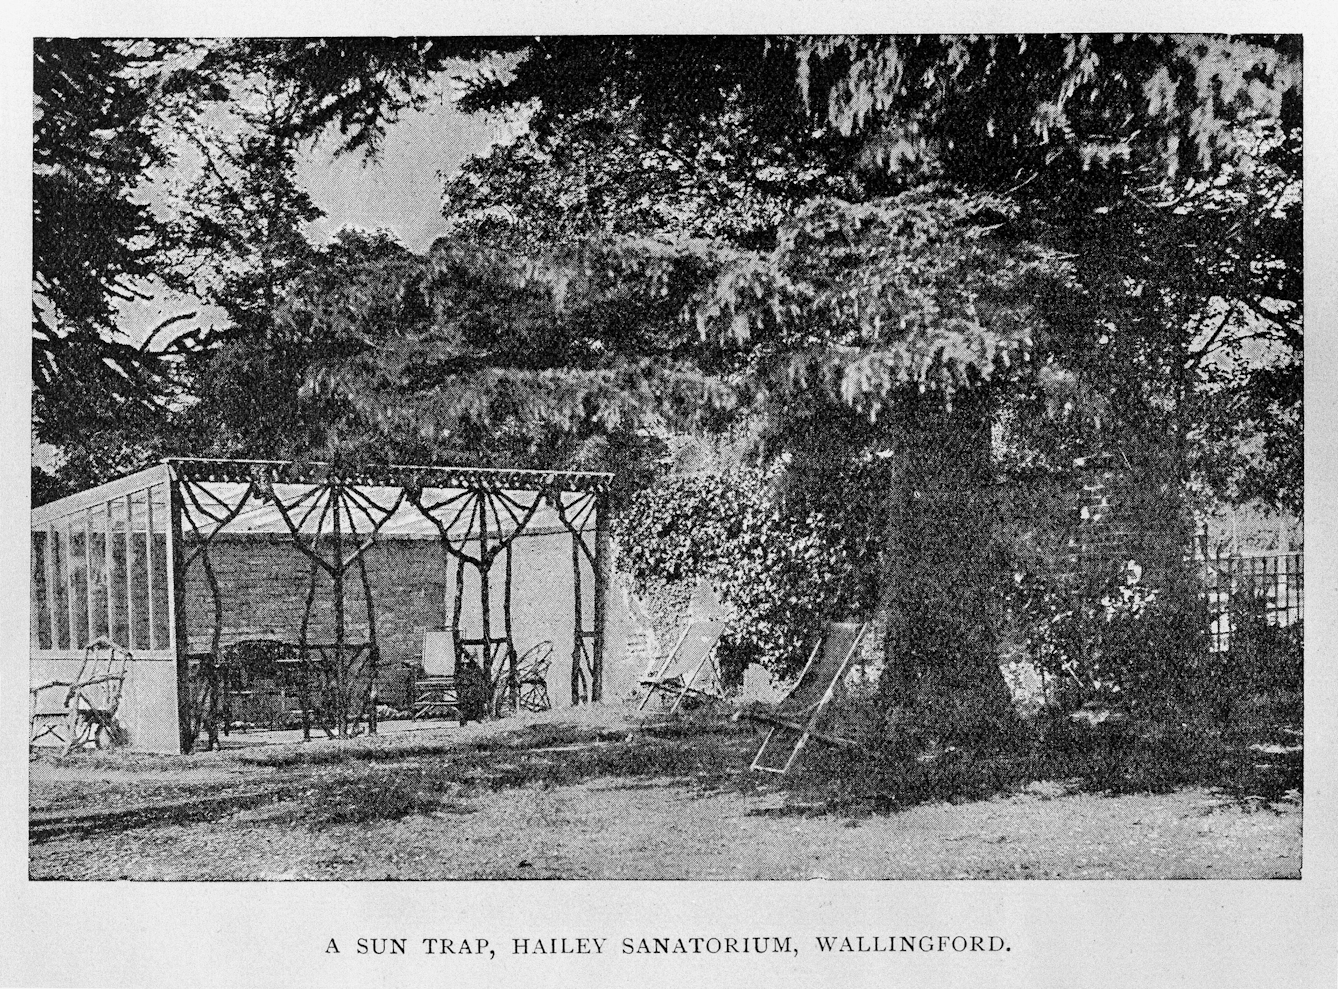 Photograph of a 'sun trap' in a sanitorium: a lightweight outdoor structure with an open front, and seating inside, next to a large tree.